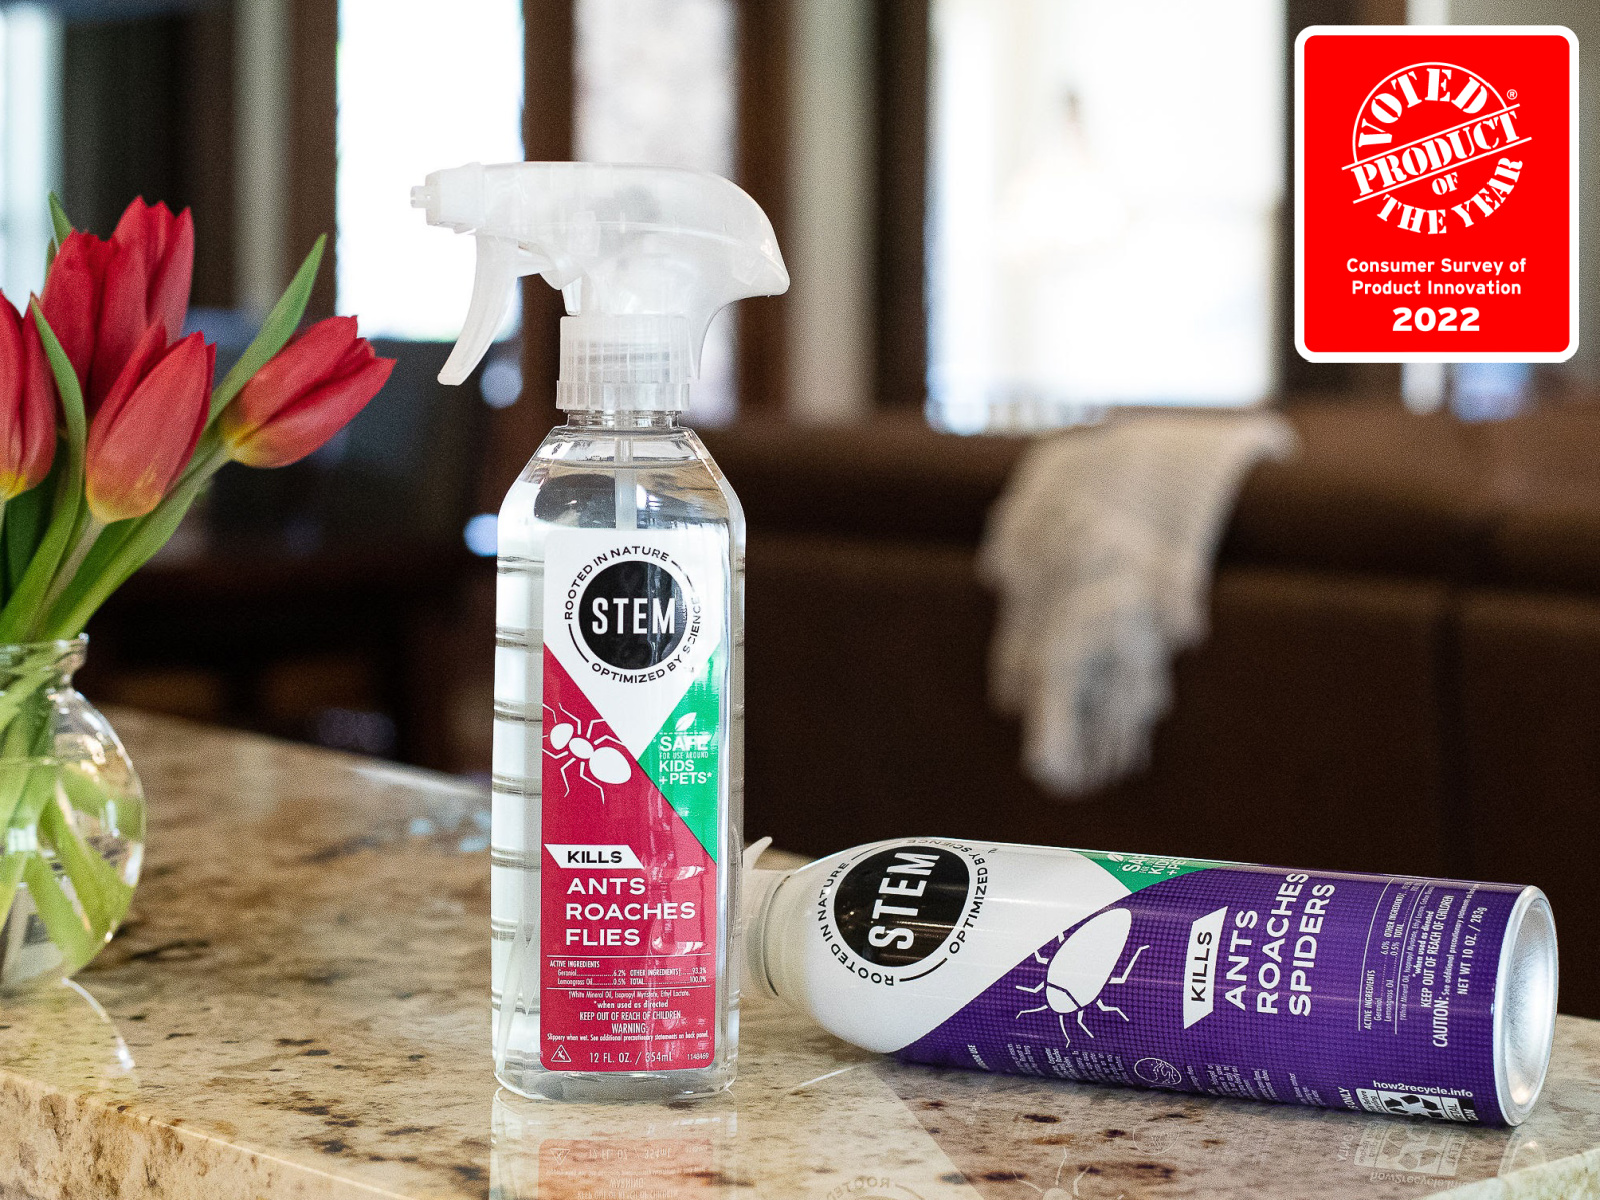 Eliminate Pests In And Around Your Home With STEM Products - Now Available At Publix on I Heart Publix 2